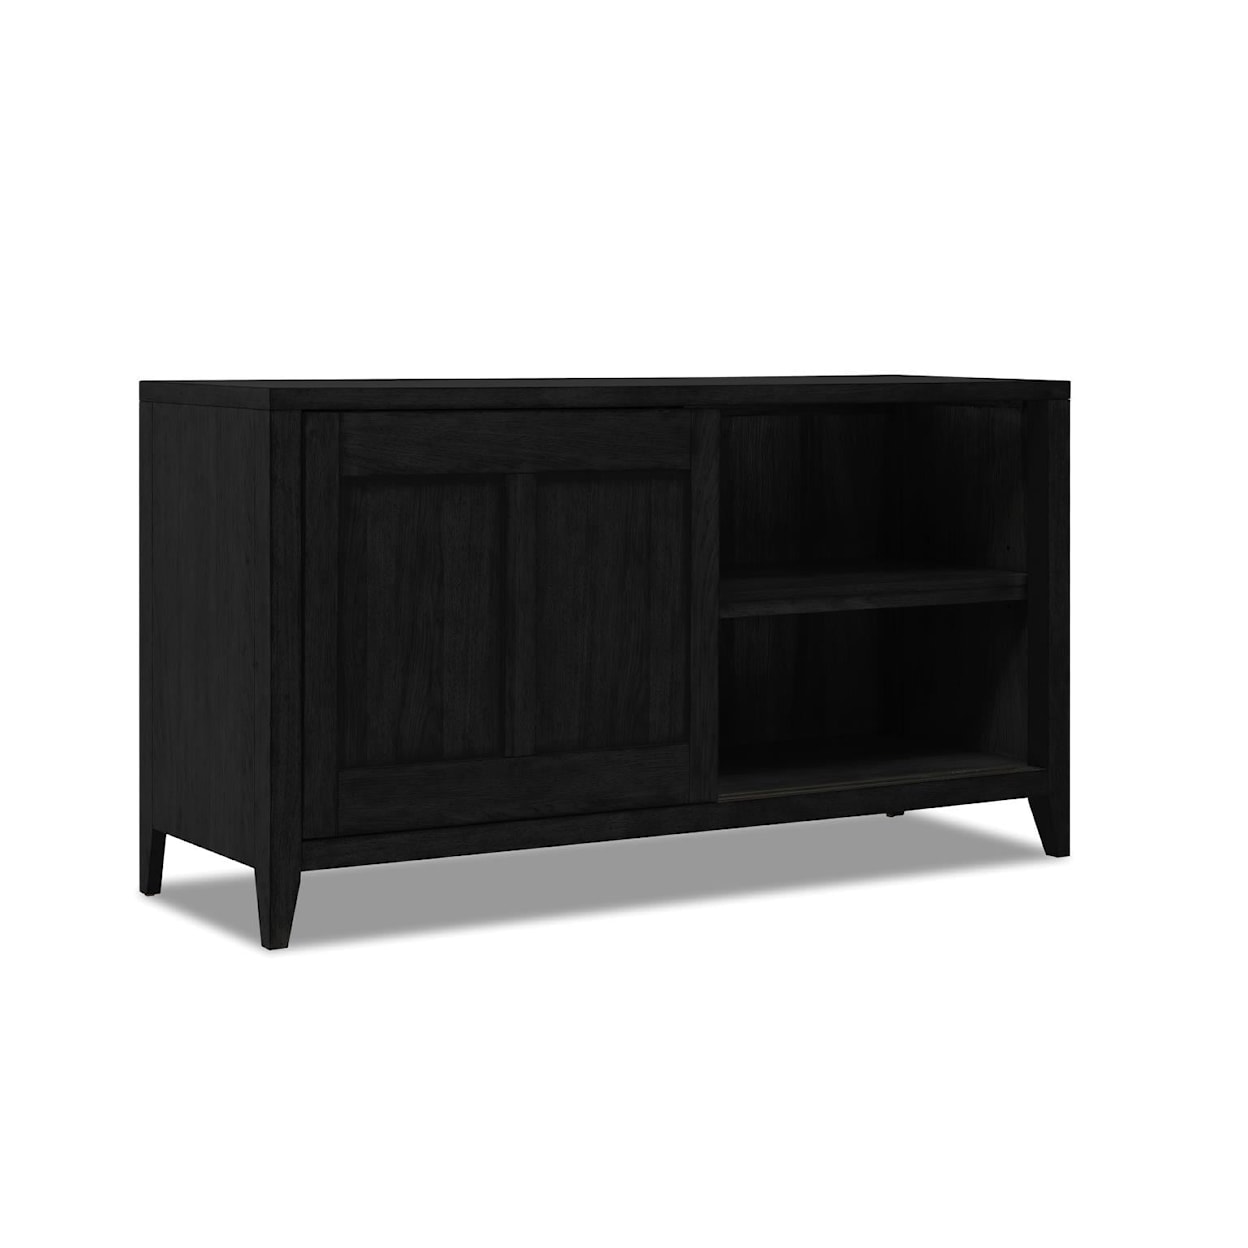 Trisha Yearwood Home Collection by Legacy Classic Today's Traditions Covington Credenza